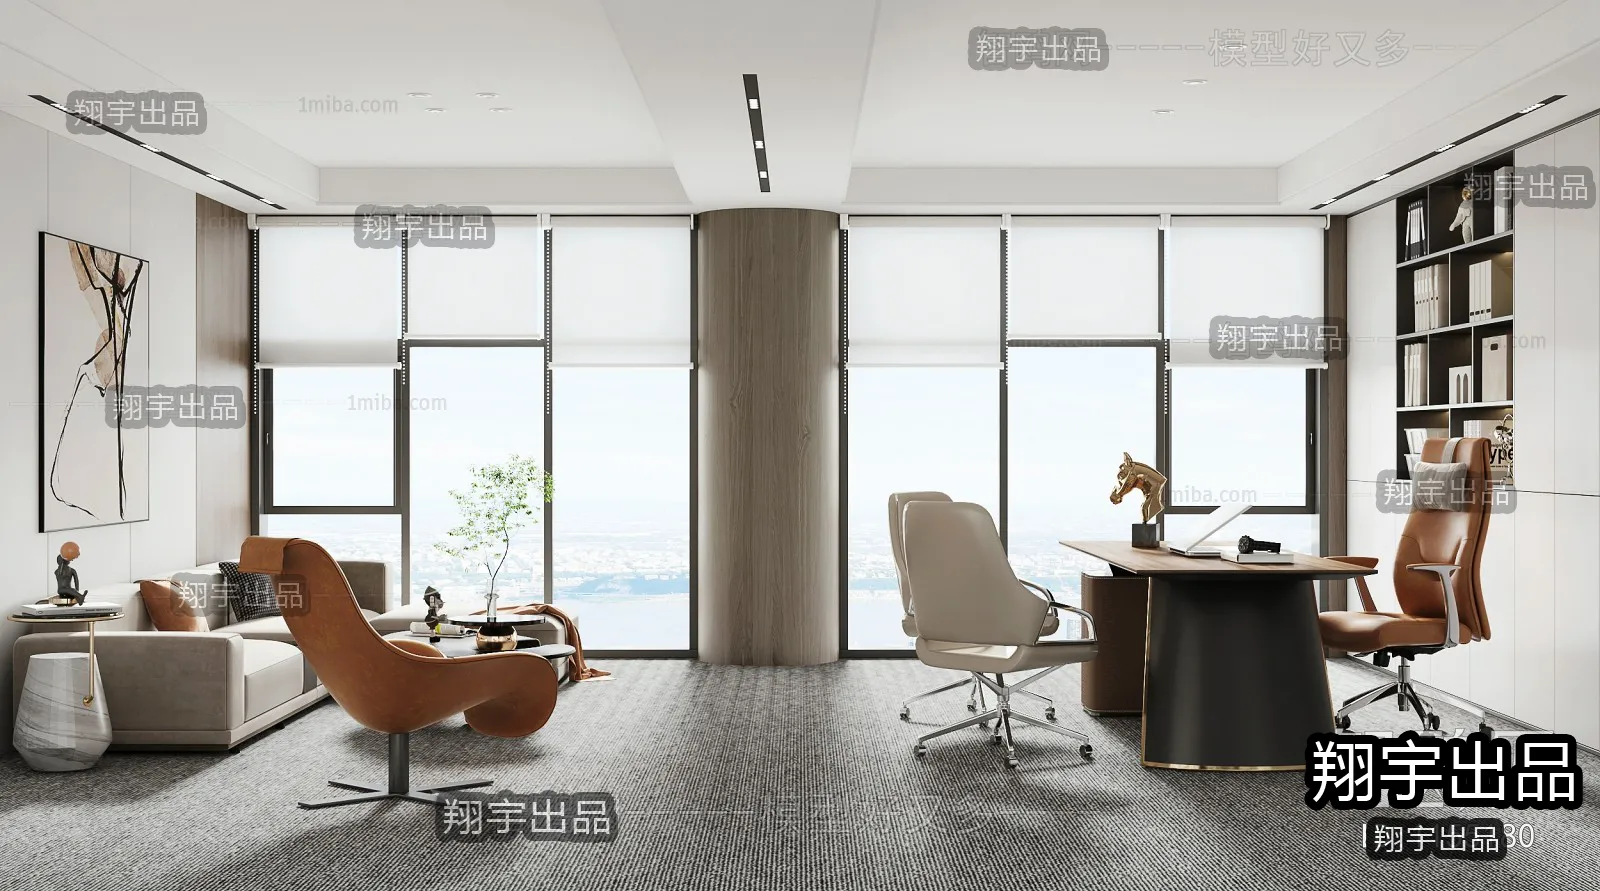 3D OFFICE INTERIOR (VRAY) – MANAGER ROOM 3D SCENES – 114